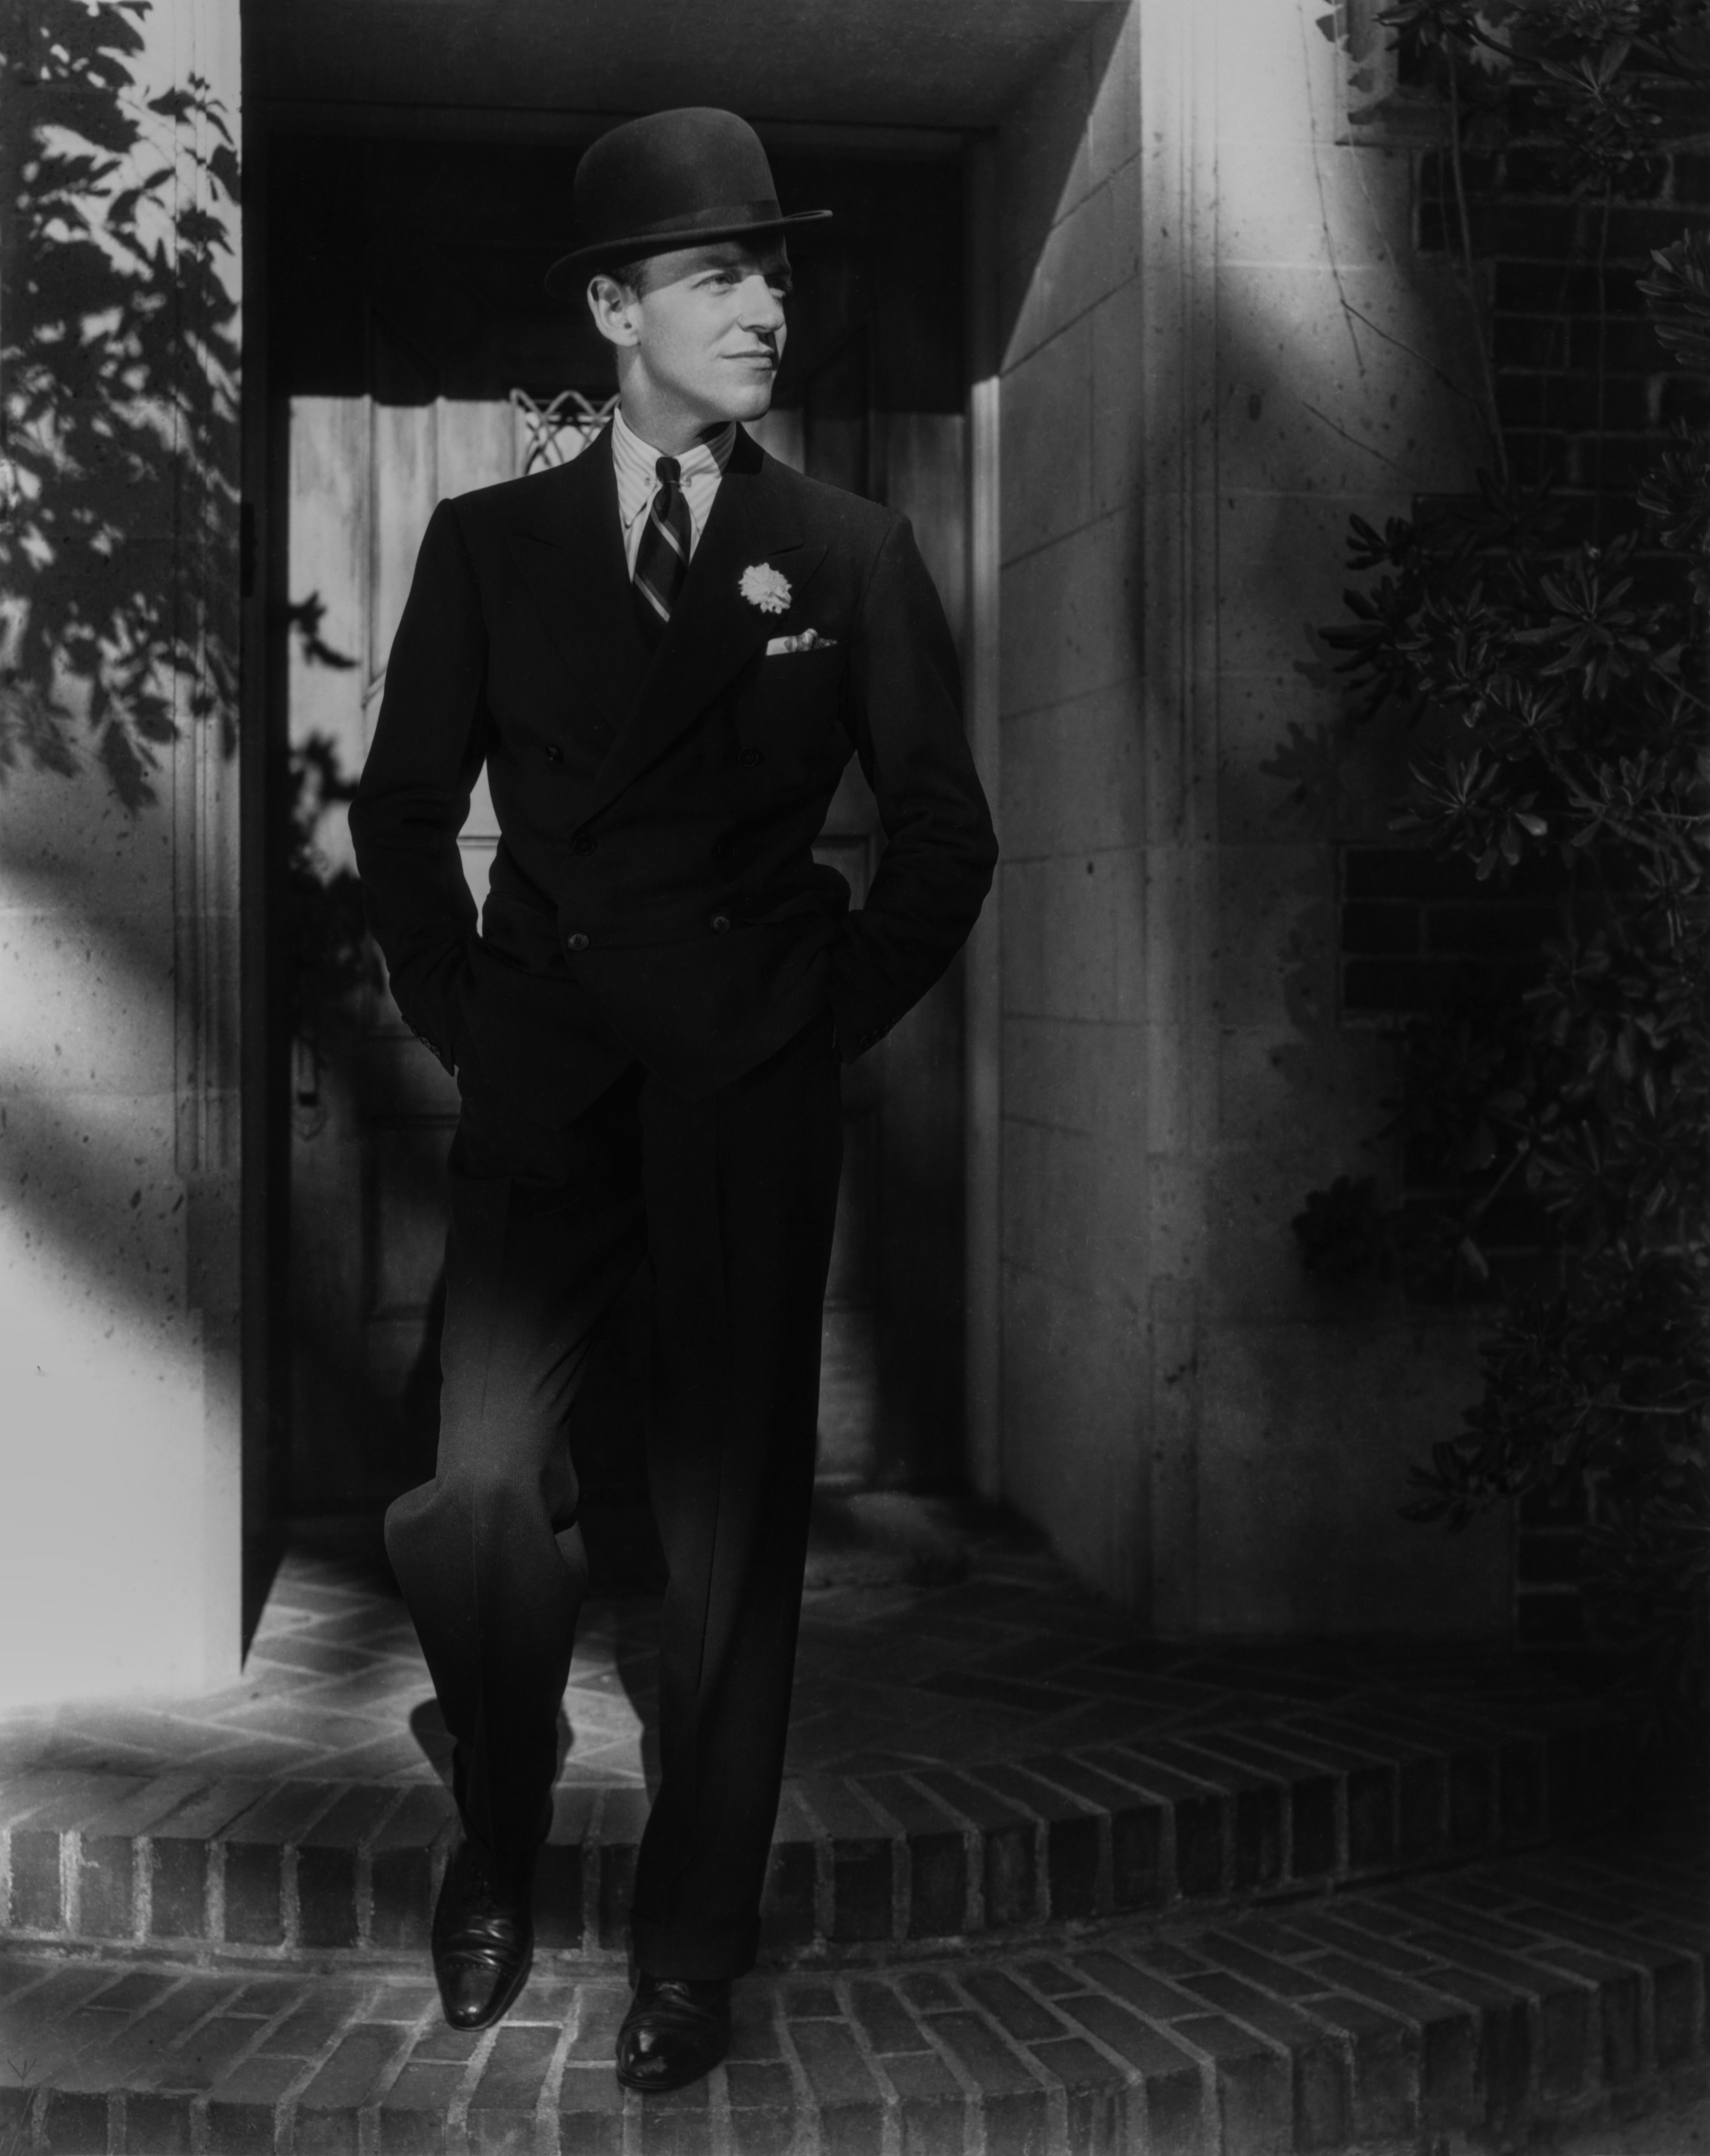 Unknown Portrait Photograph - Fred Astaire Posed in Doorway II Movie Star News Fine Art Print